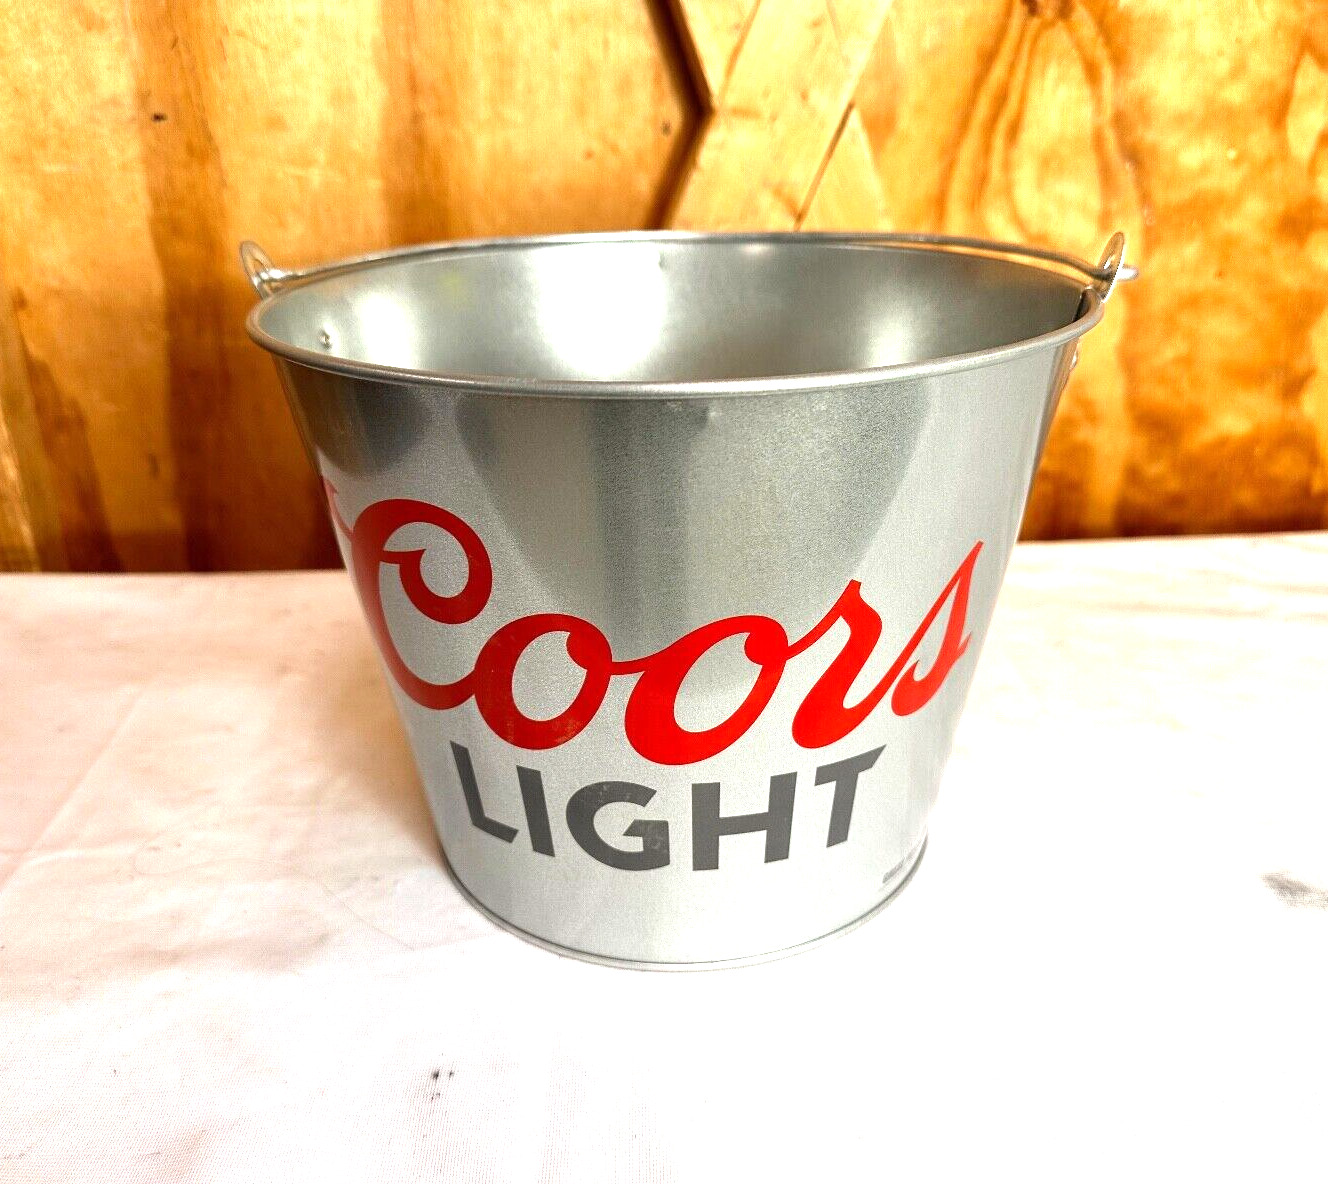 Coors Light Beer Official NY Giants Logo 5 Quart Metal Ice Bucket New Old Stock